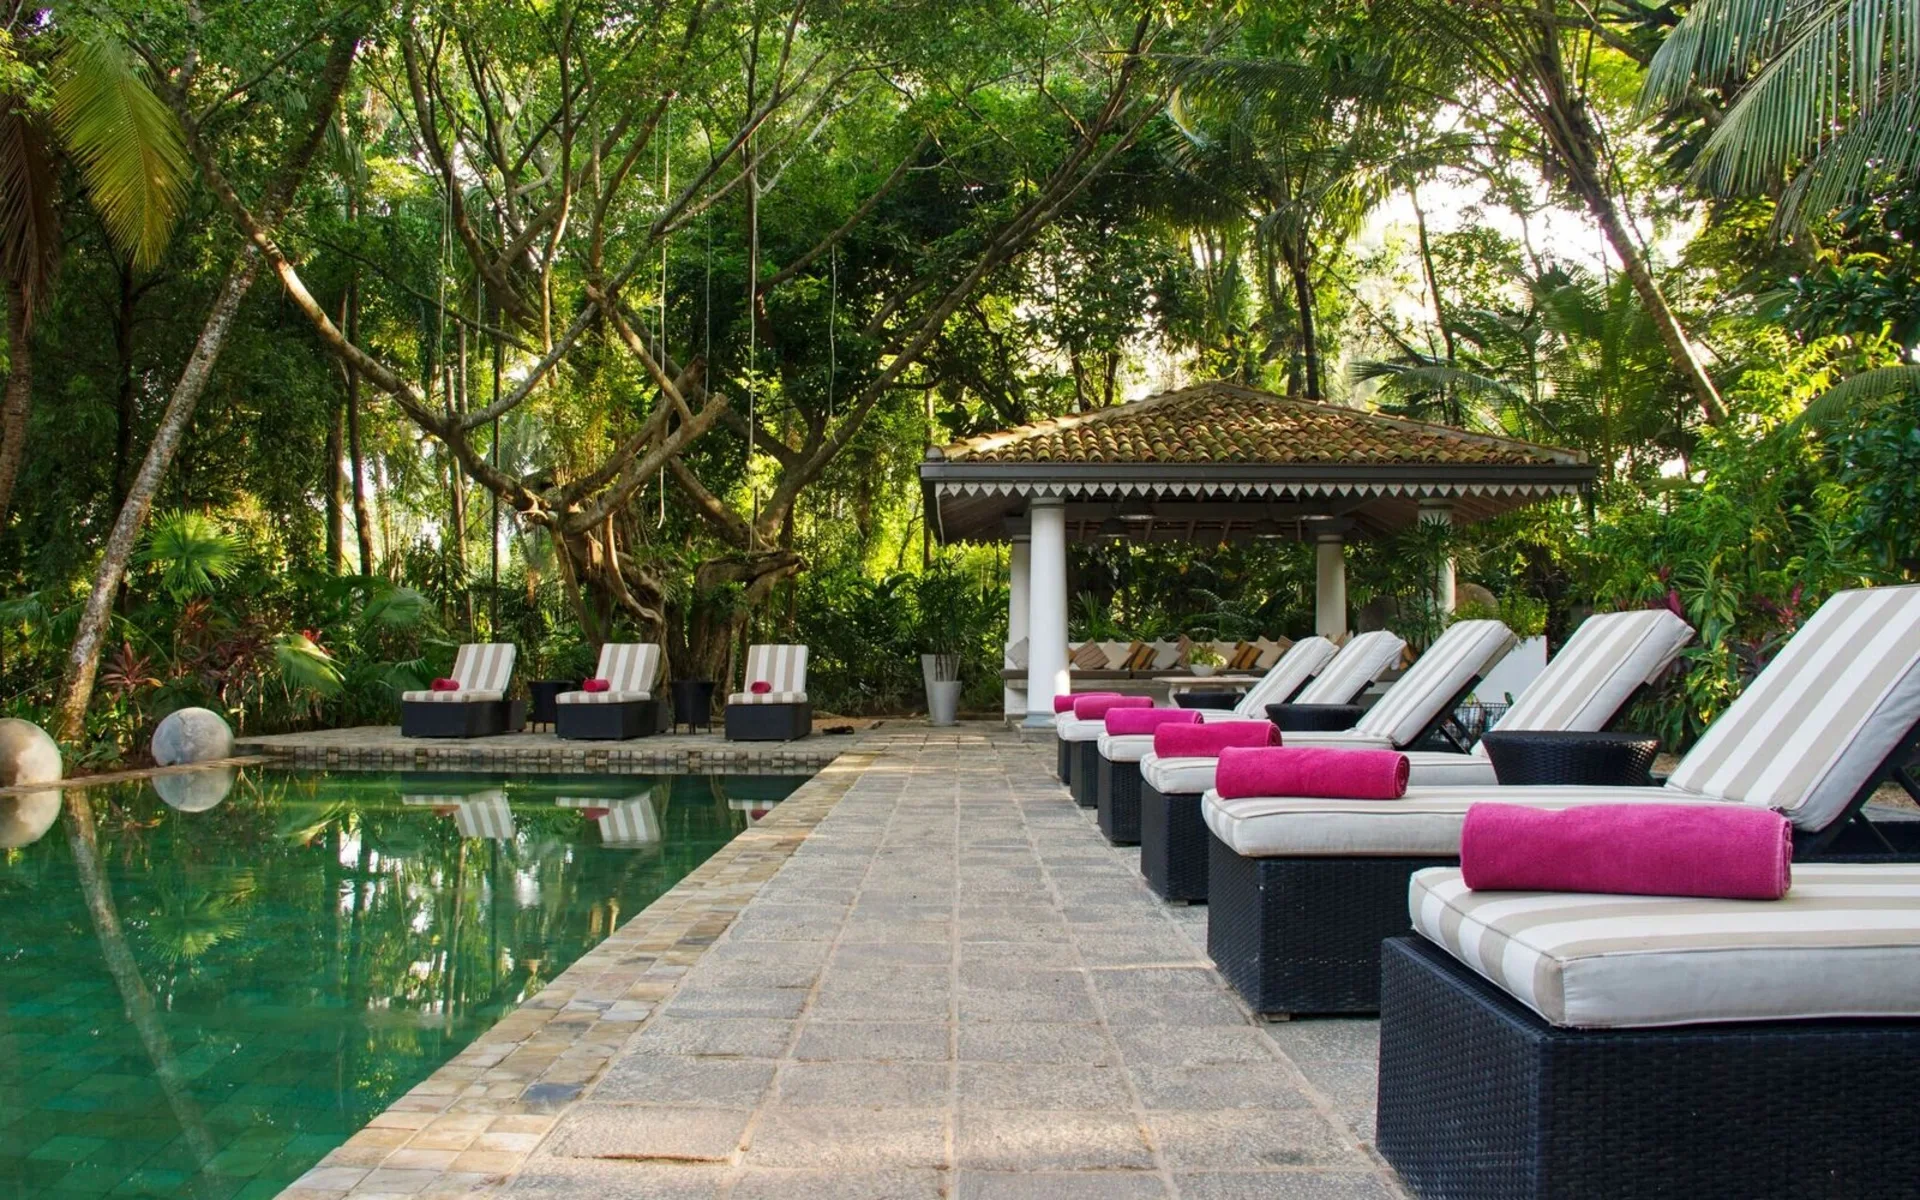 The main swimming pool is surrounded by a stone-paved sun deck with sun loungers that have pink towels placed on them.